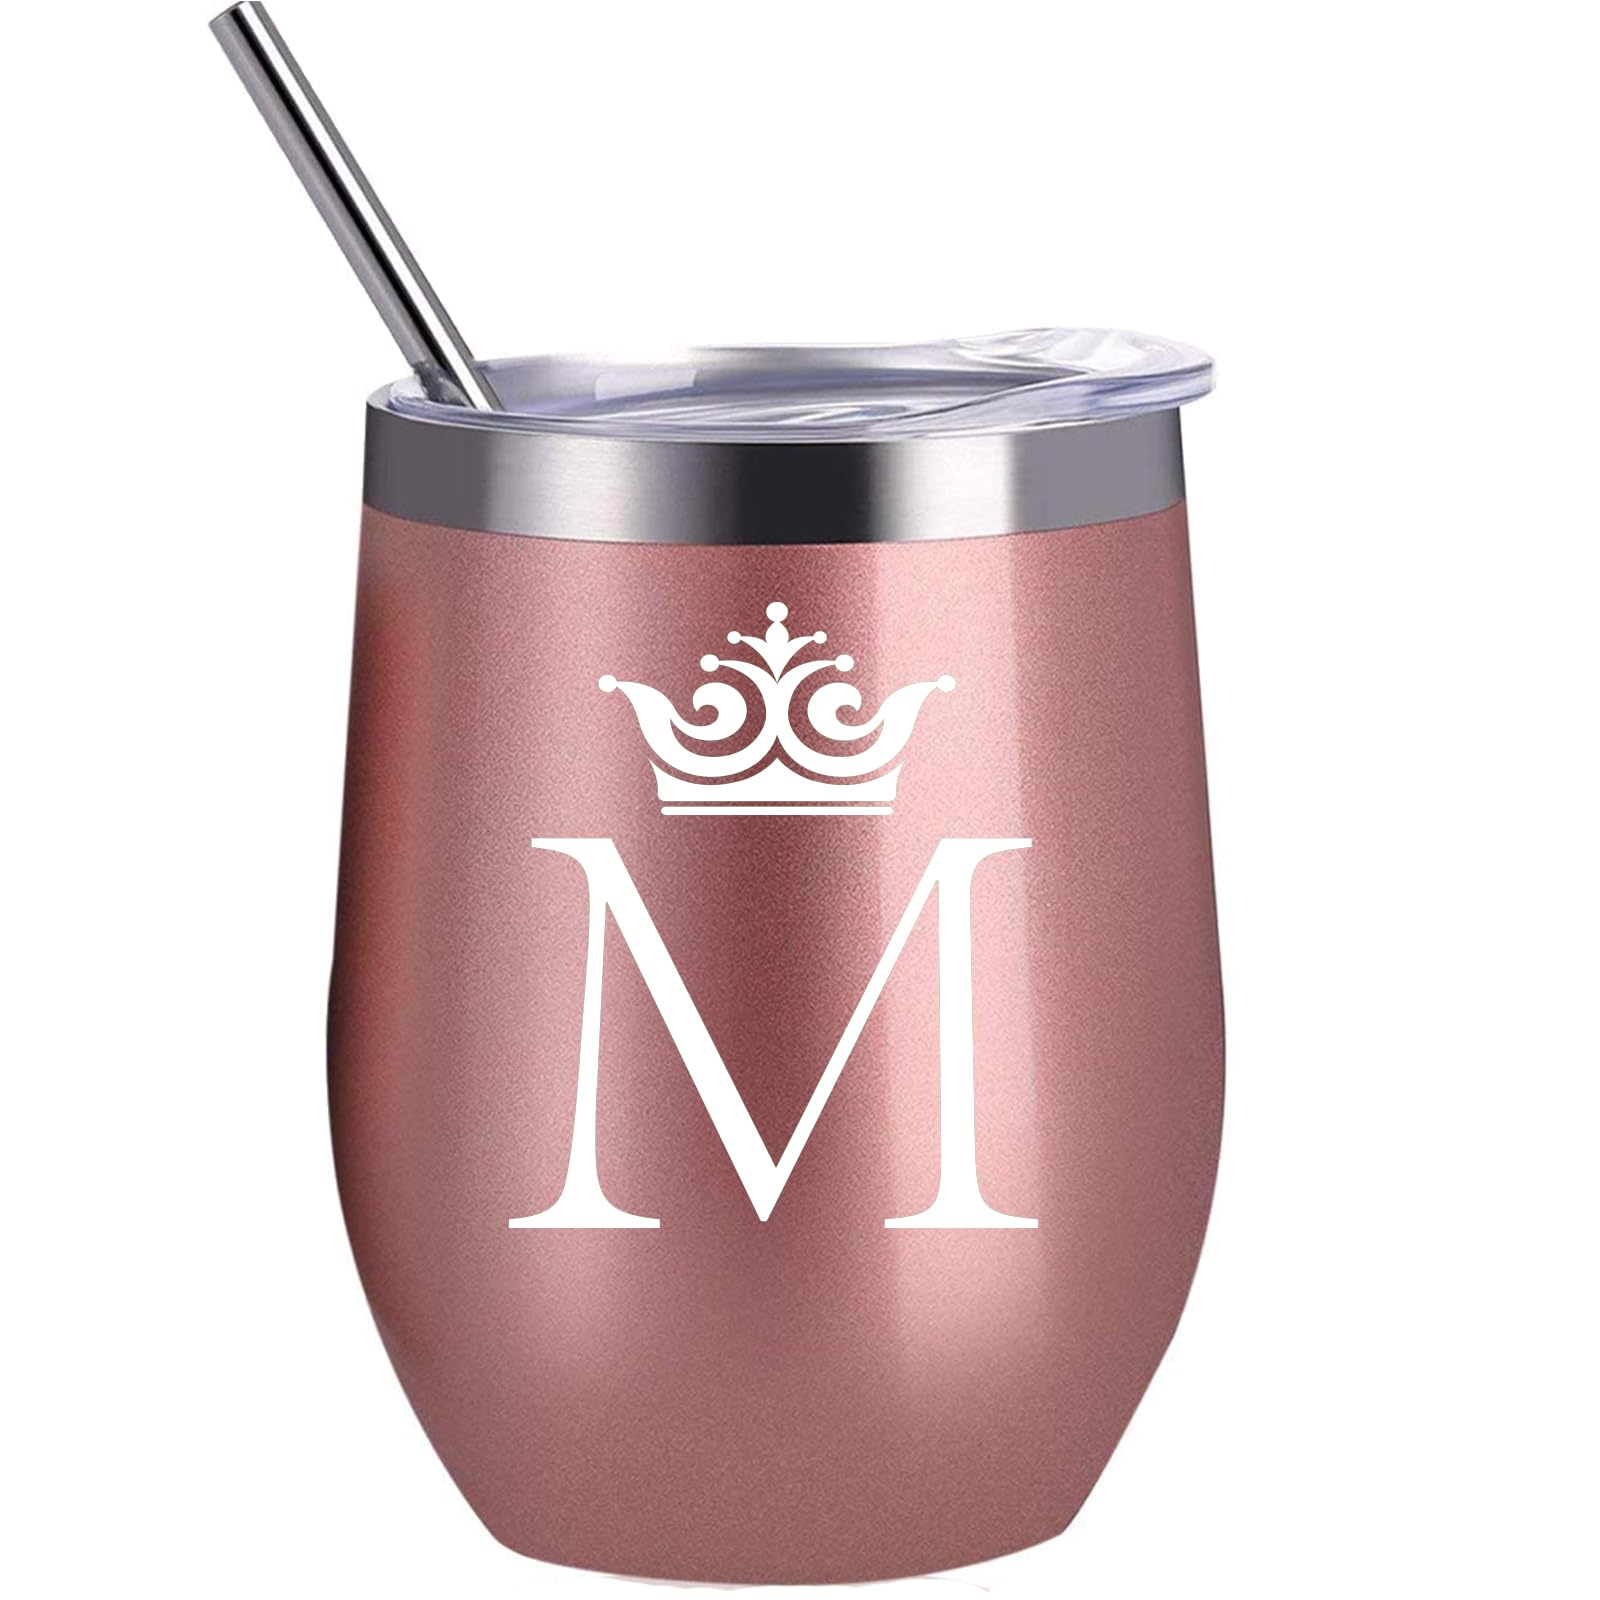 COFOZA Letter M Initial Gifts for Woman Men 12 Oz Stainless Steel Wine Tumbler Drink Cup Monogram Mug Personalized Birthday Wedding Bridesmaid Proposal Engagement Christmas Gift (M)